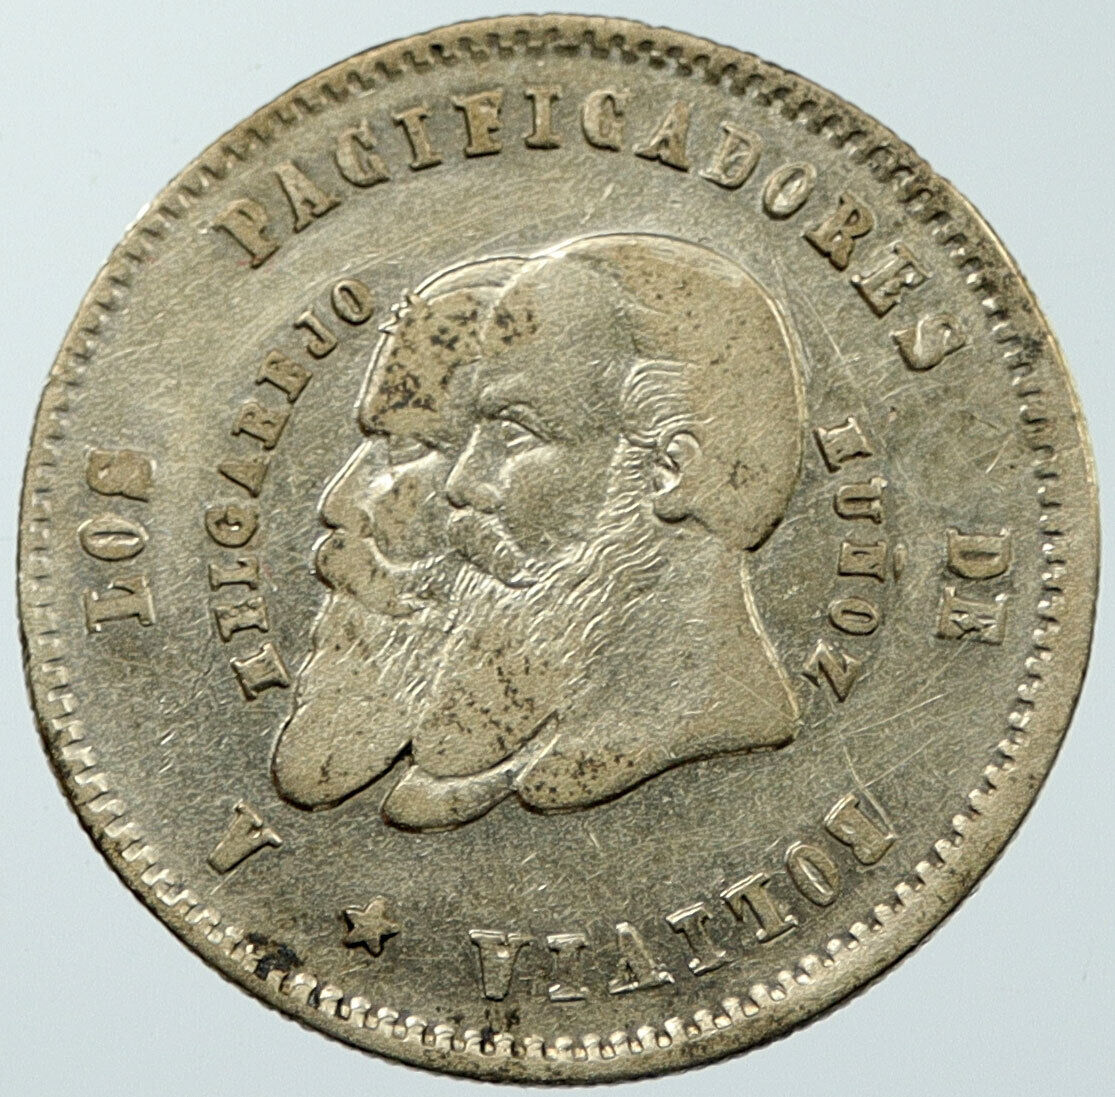 1865 BOLIVIA Large Authentic General Old Antique 1/2 Half Melgarejo Coin i116579